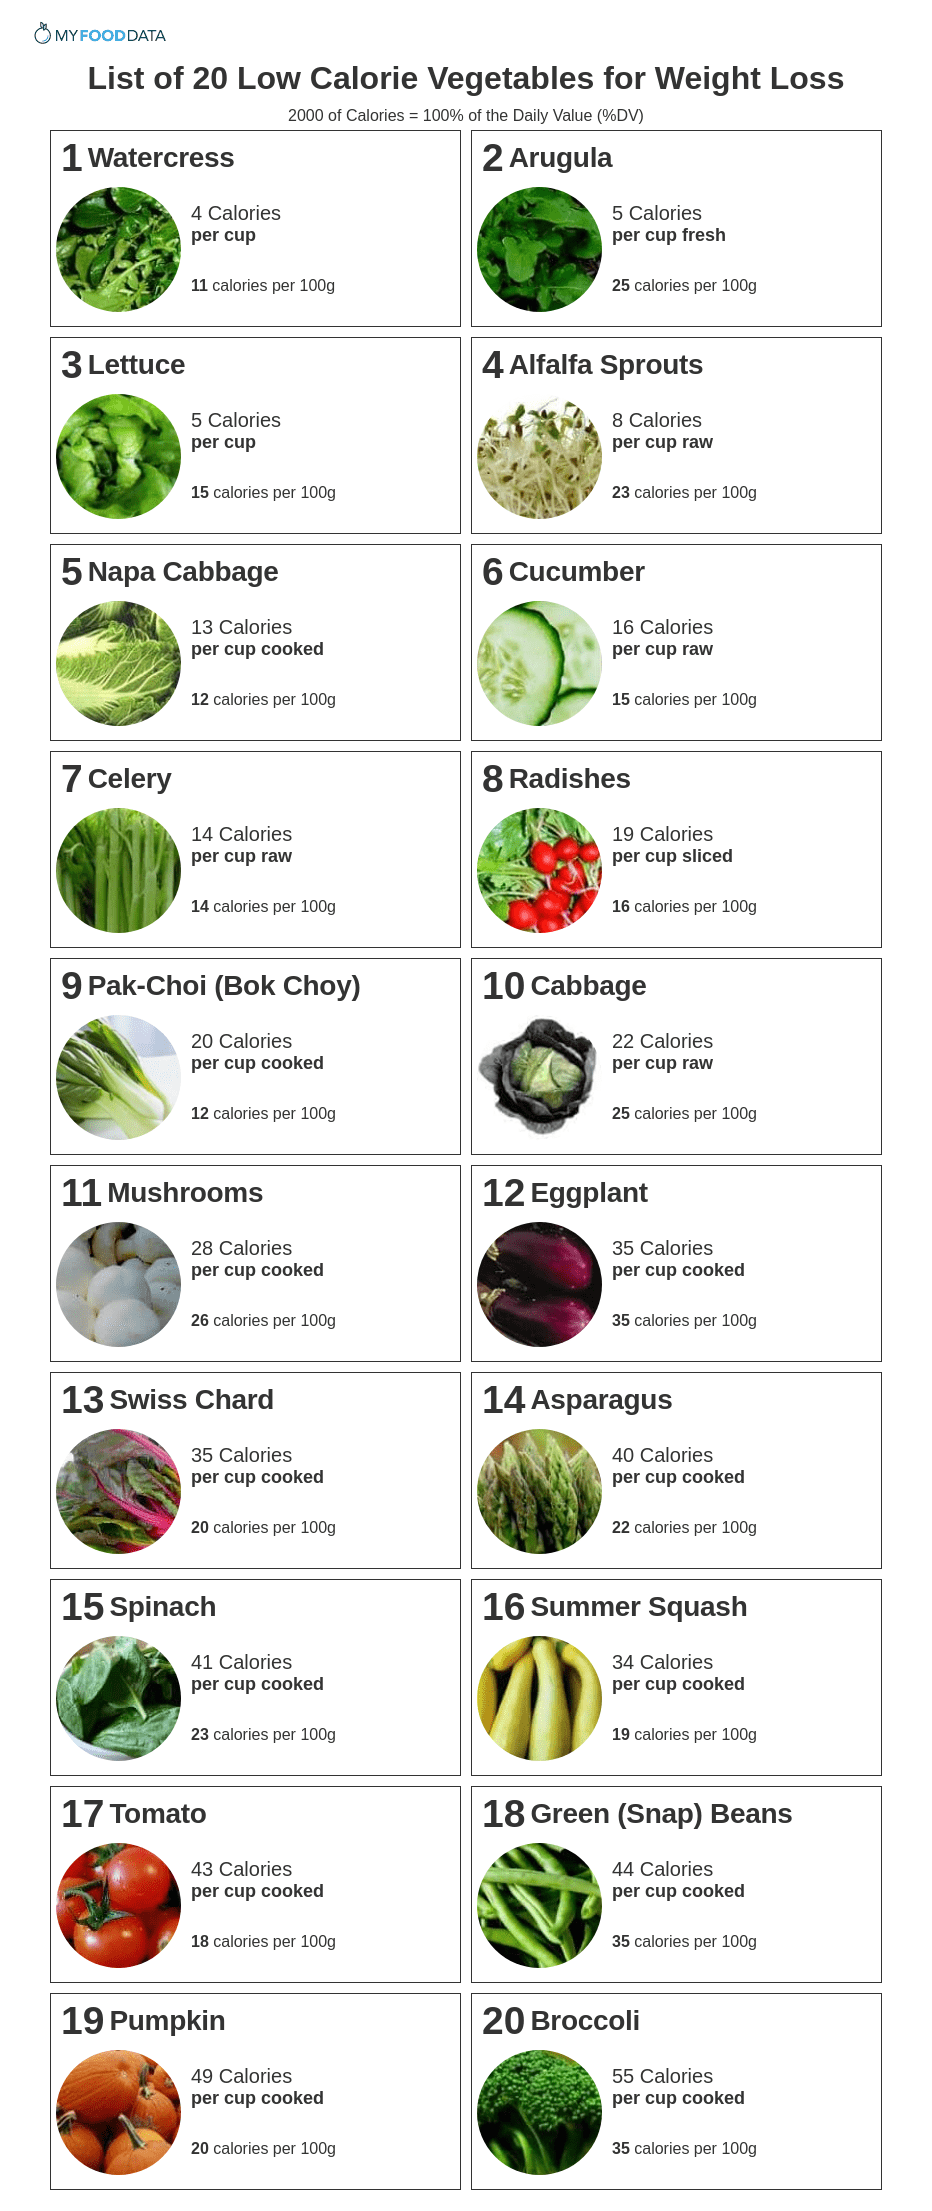 A printable list of vegetables low in calories.